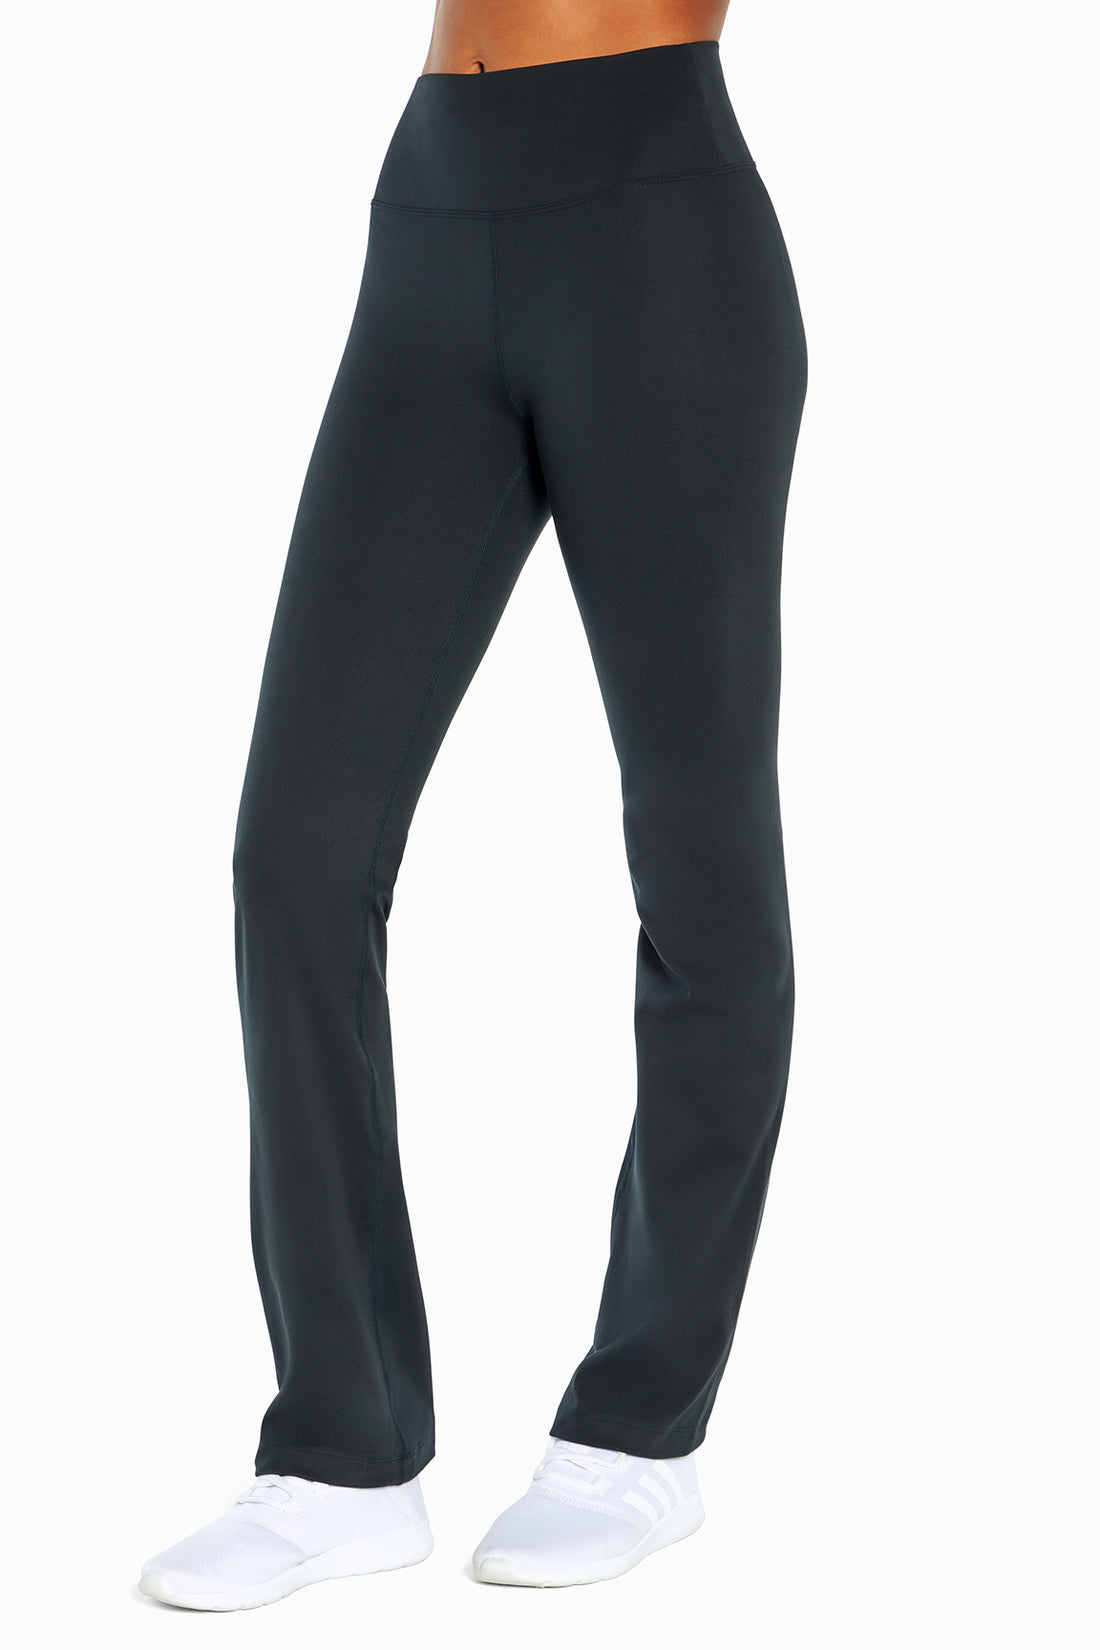 Balance Collection Solid Black Leggings Size S - 81% off